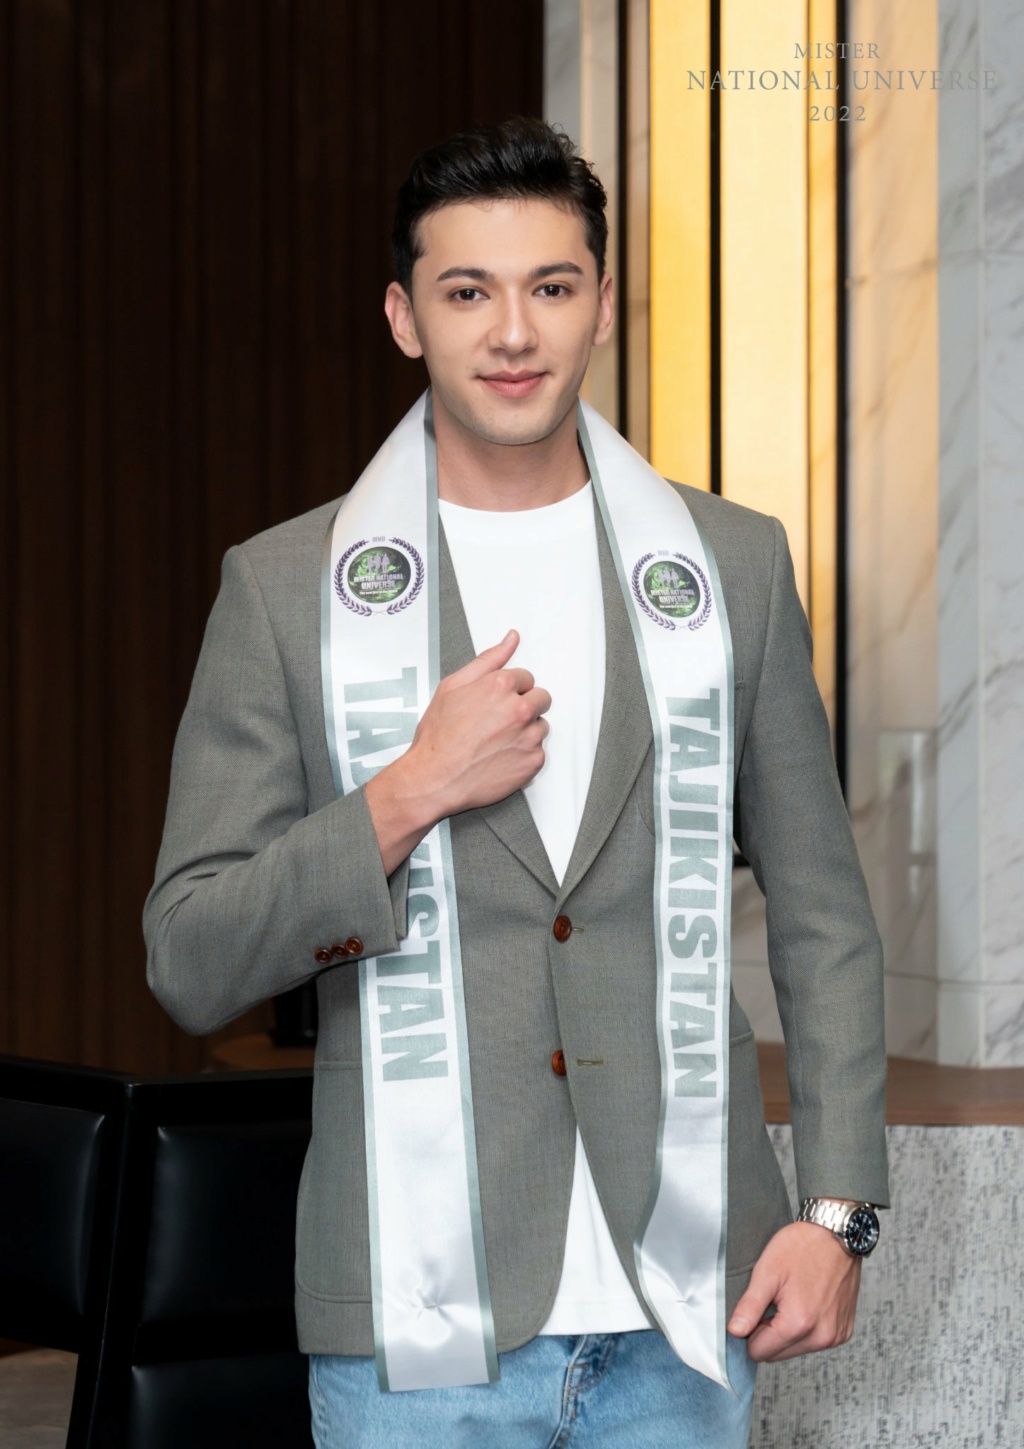 Mister National Universe 2022 is Việt Hoàng from Vietnam 28534811